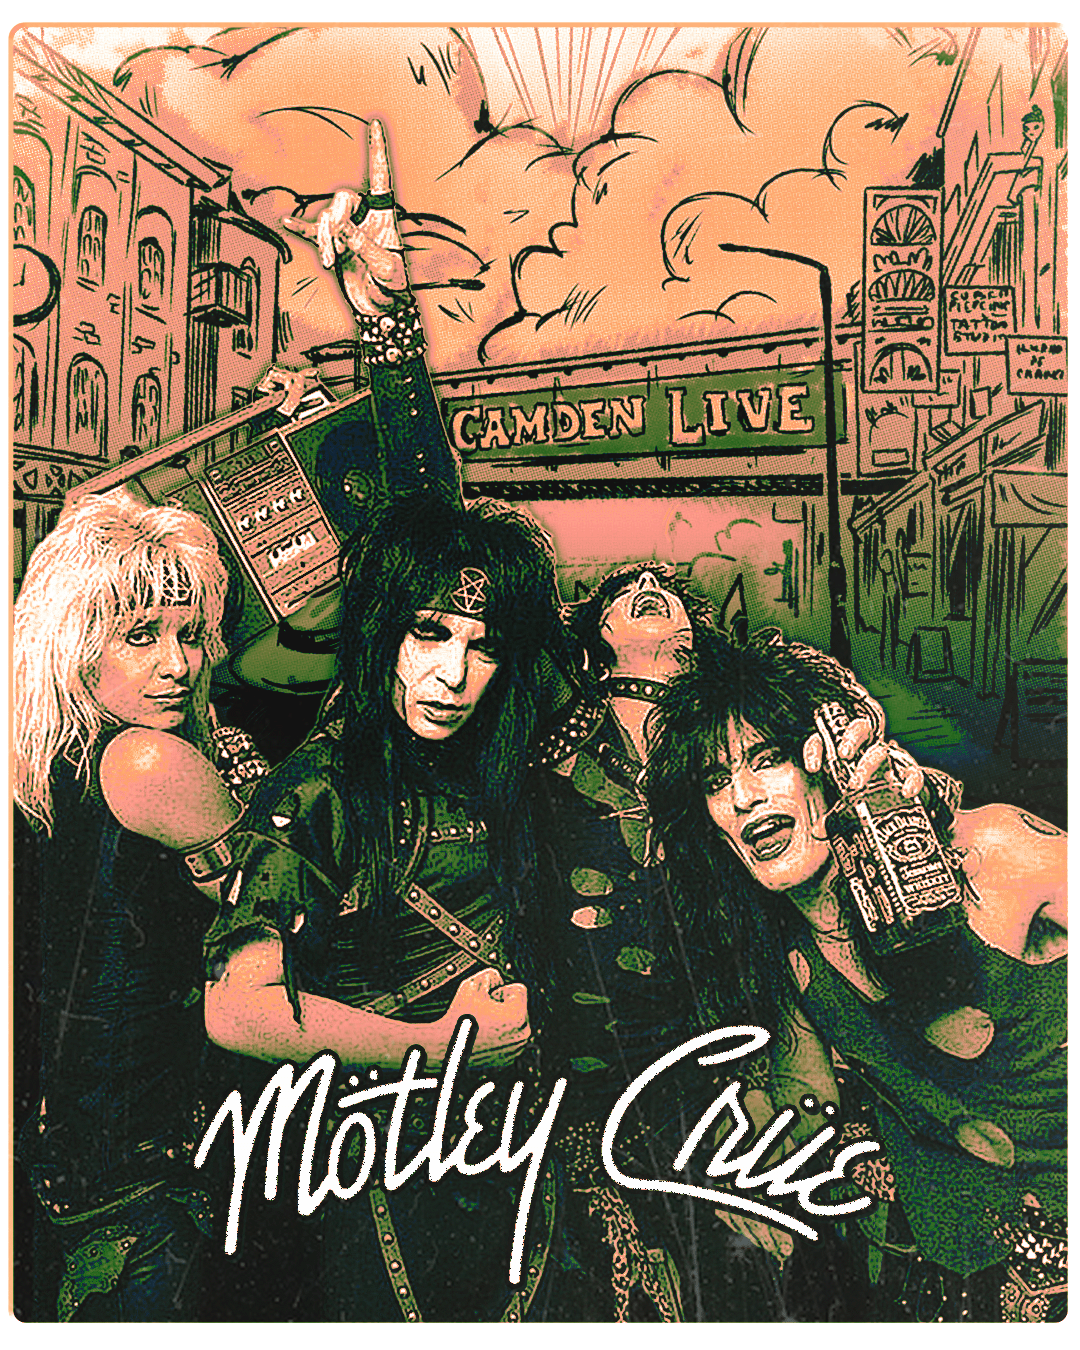 Mötley Crüe's surprise Camden gig tonight and free tickets to Wembley show